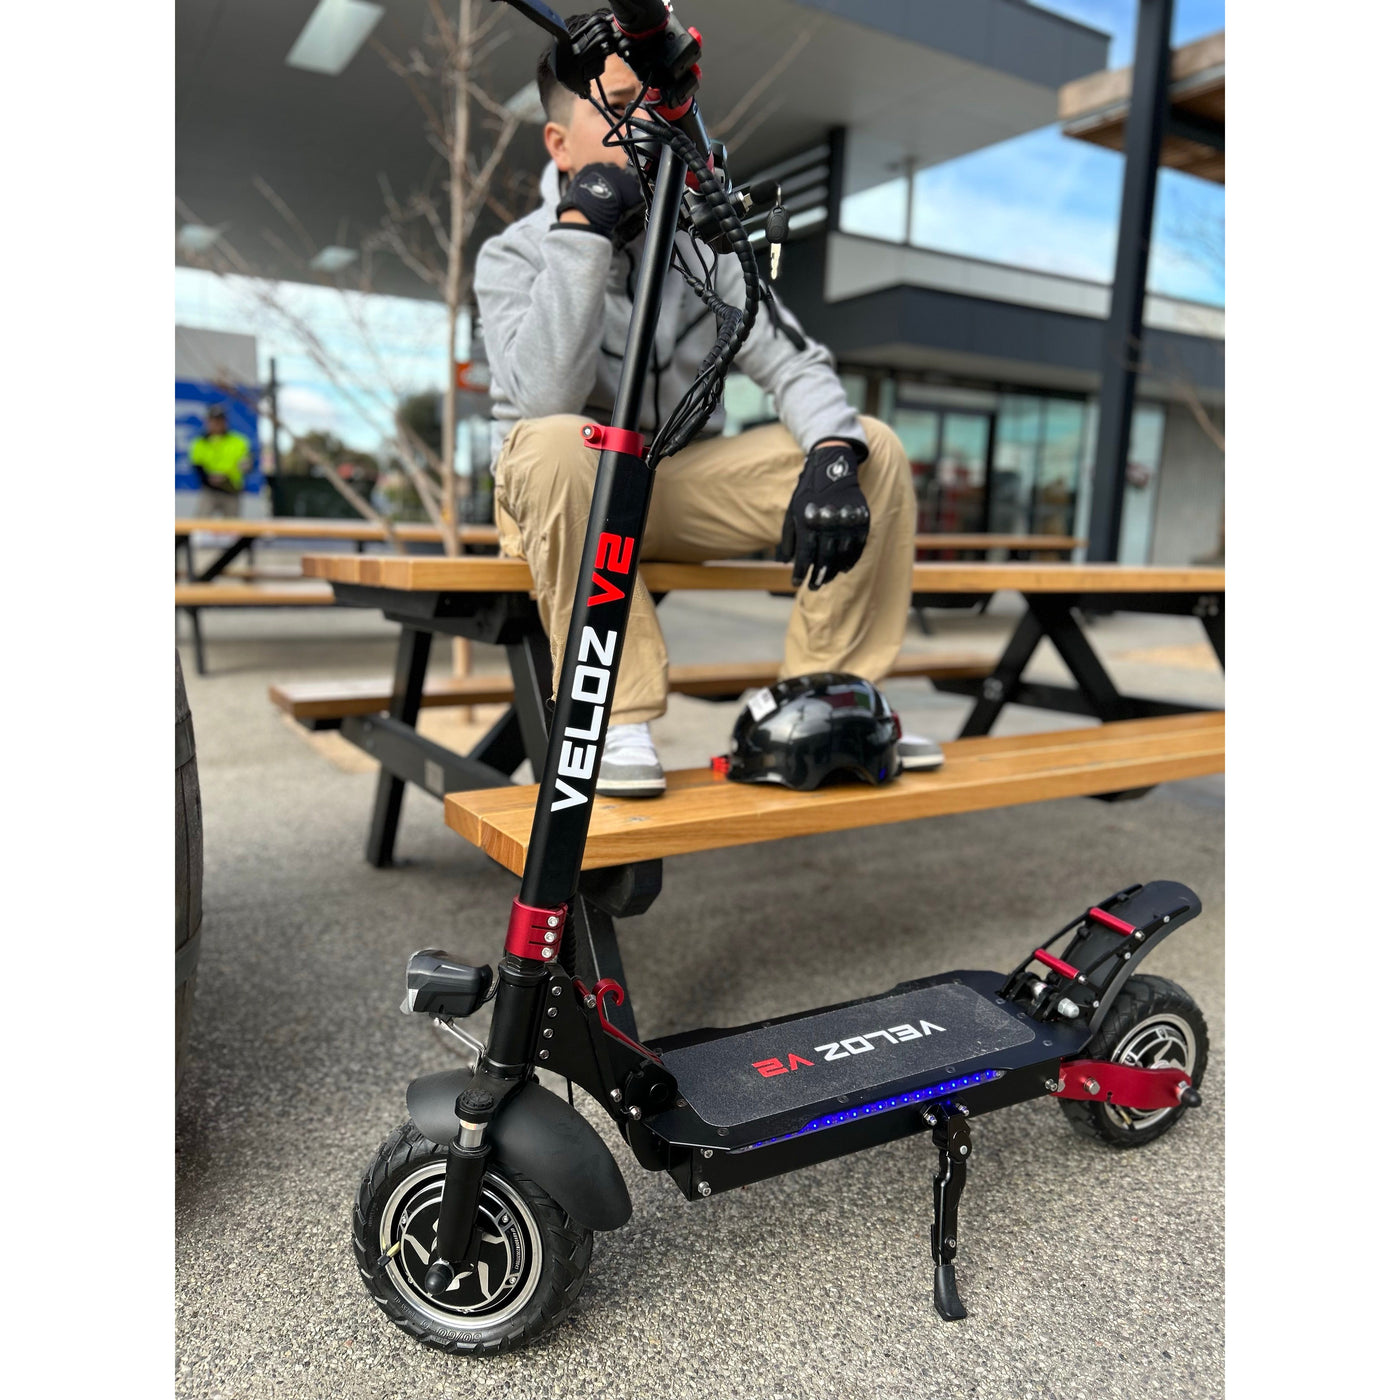 ELECTRIC SCOOTER VELOZ V2 DUAL MOTOR 2400W WITH KEYLOCK SYSTEM ALL TERRAIN 6 MONTHS FREE SERVICE Model 2022 - EOzzie Electric Vehicles